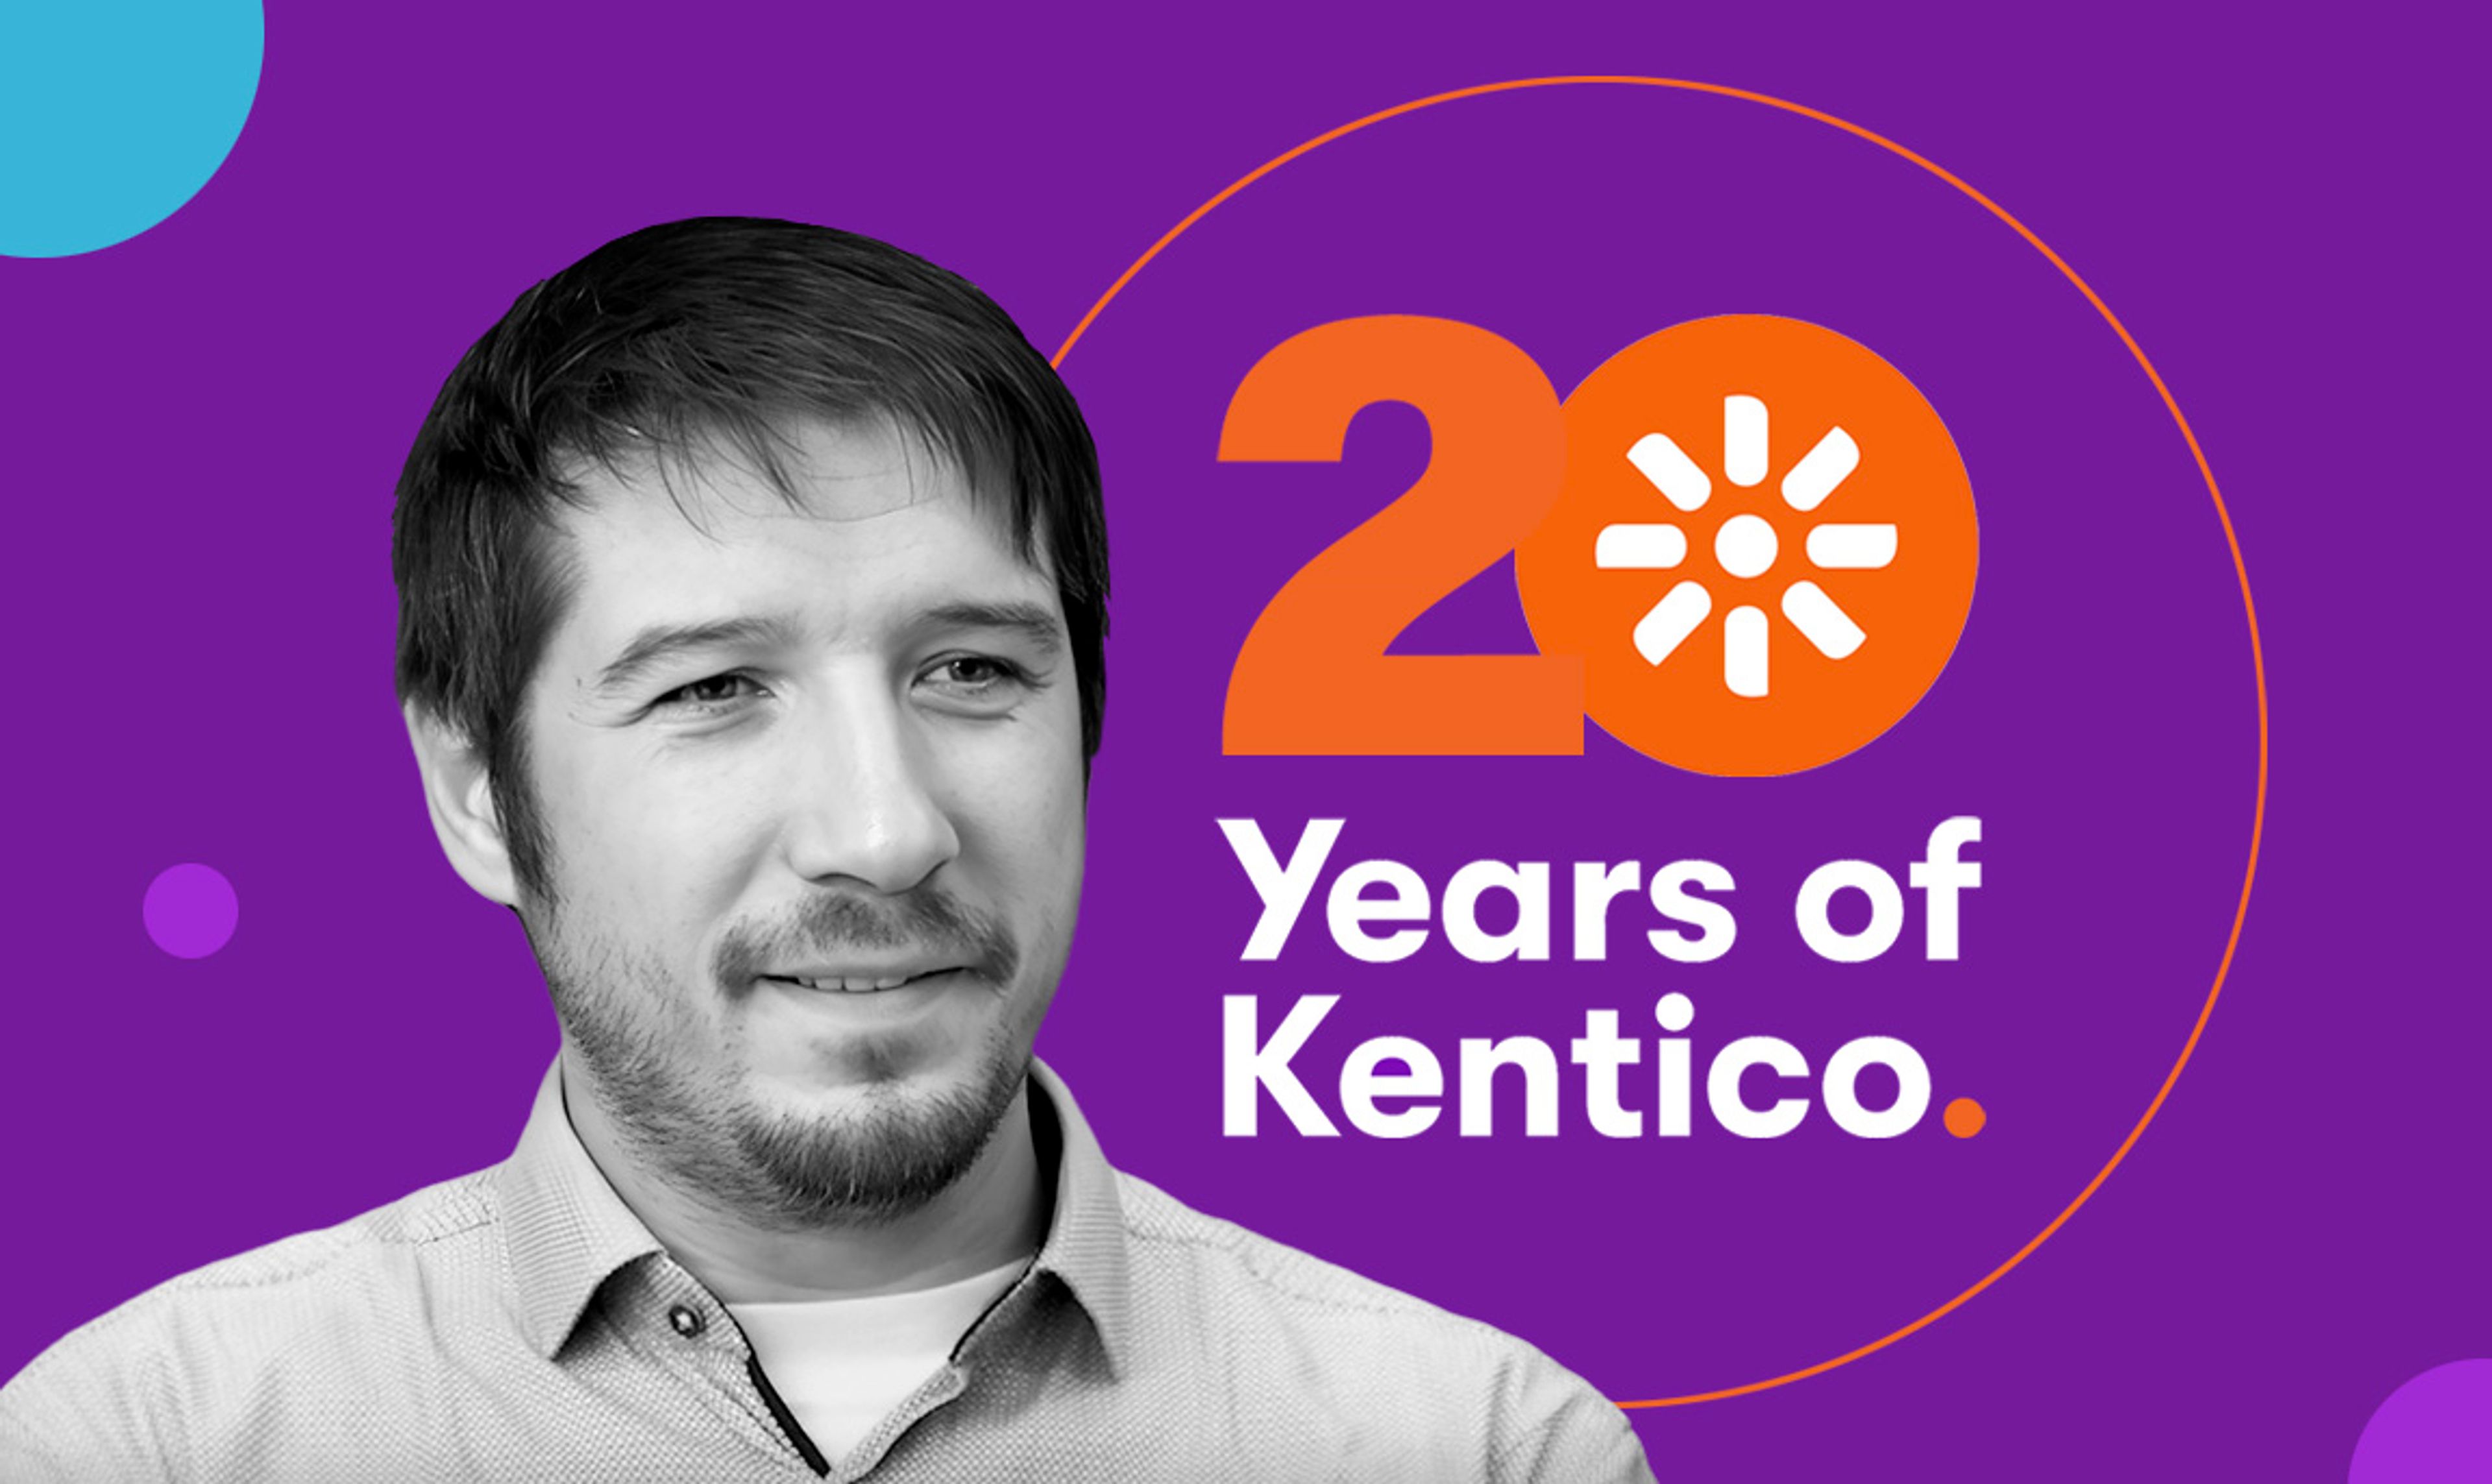 Headshot of Kentico CEO Dominik Pinter with text that reads "20 Years of Kentico"